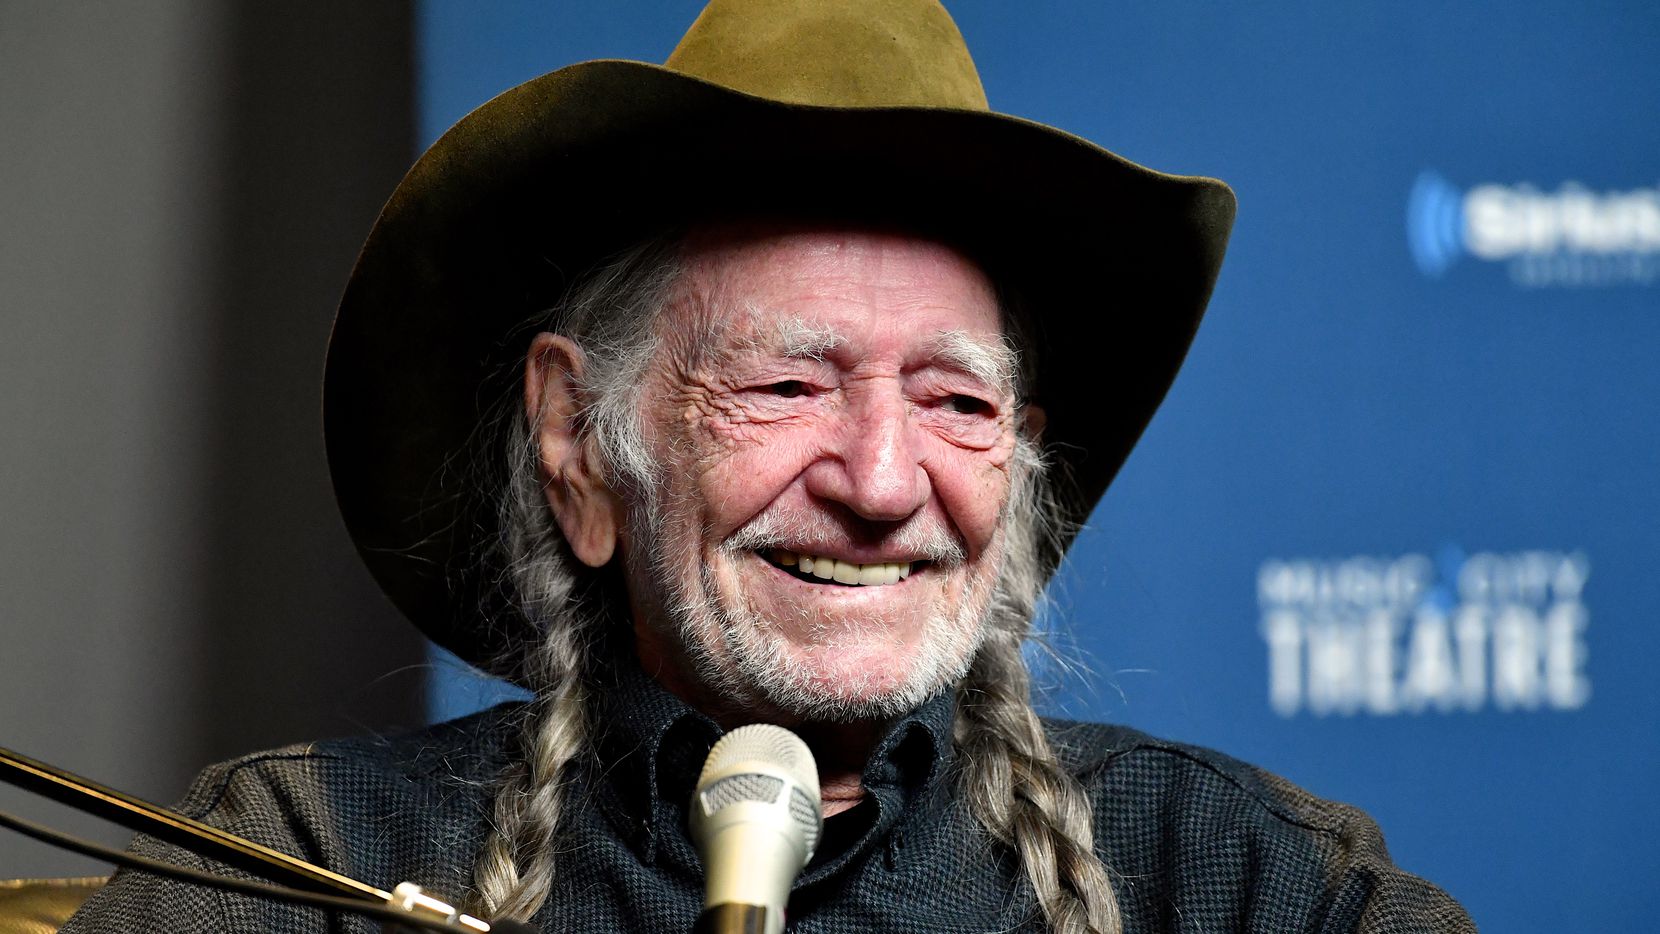 How tall is Willie Nelson?